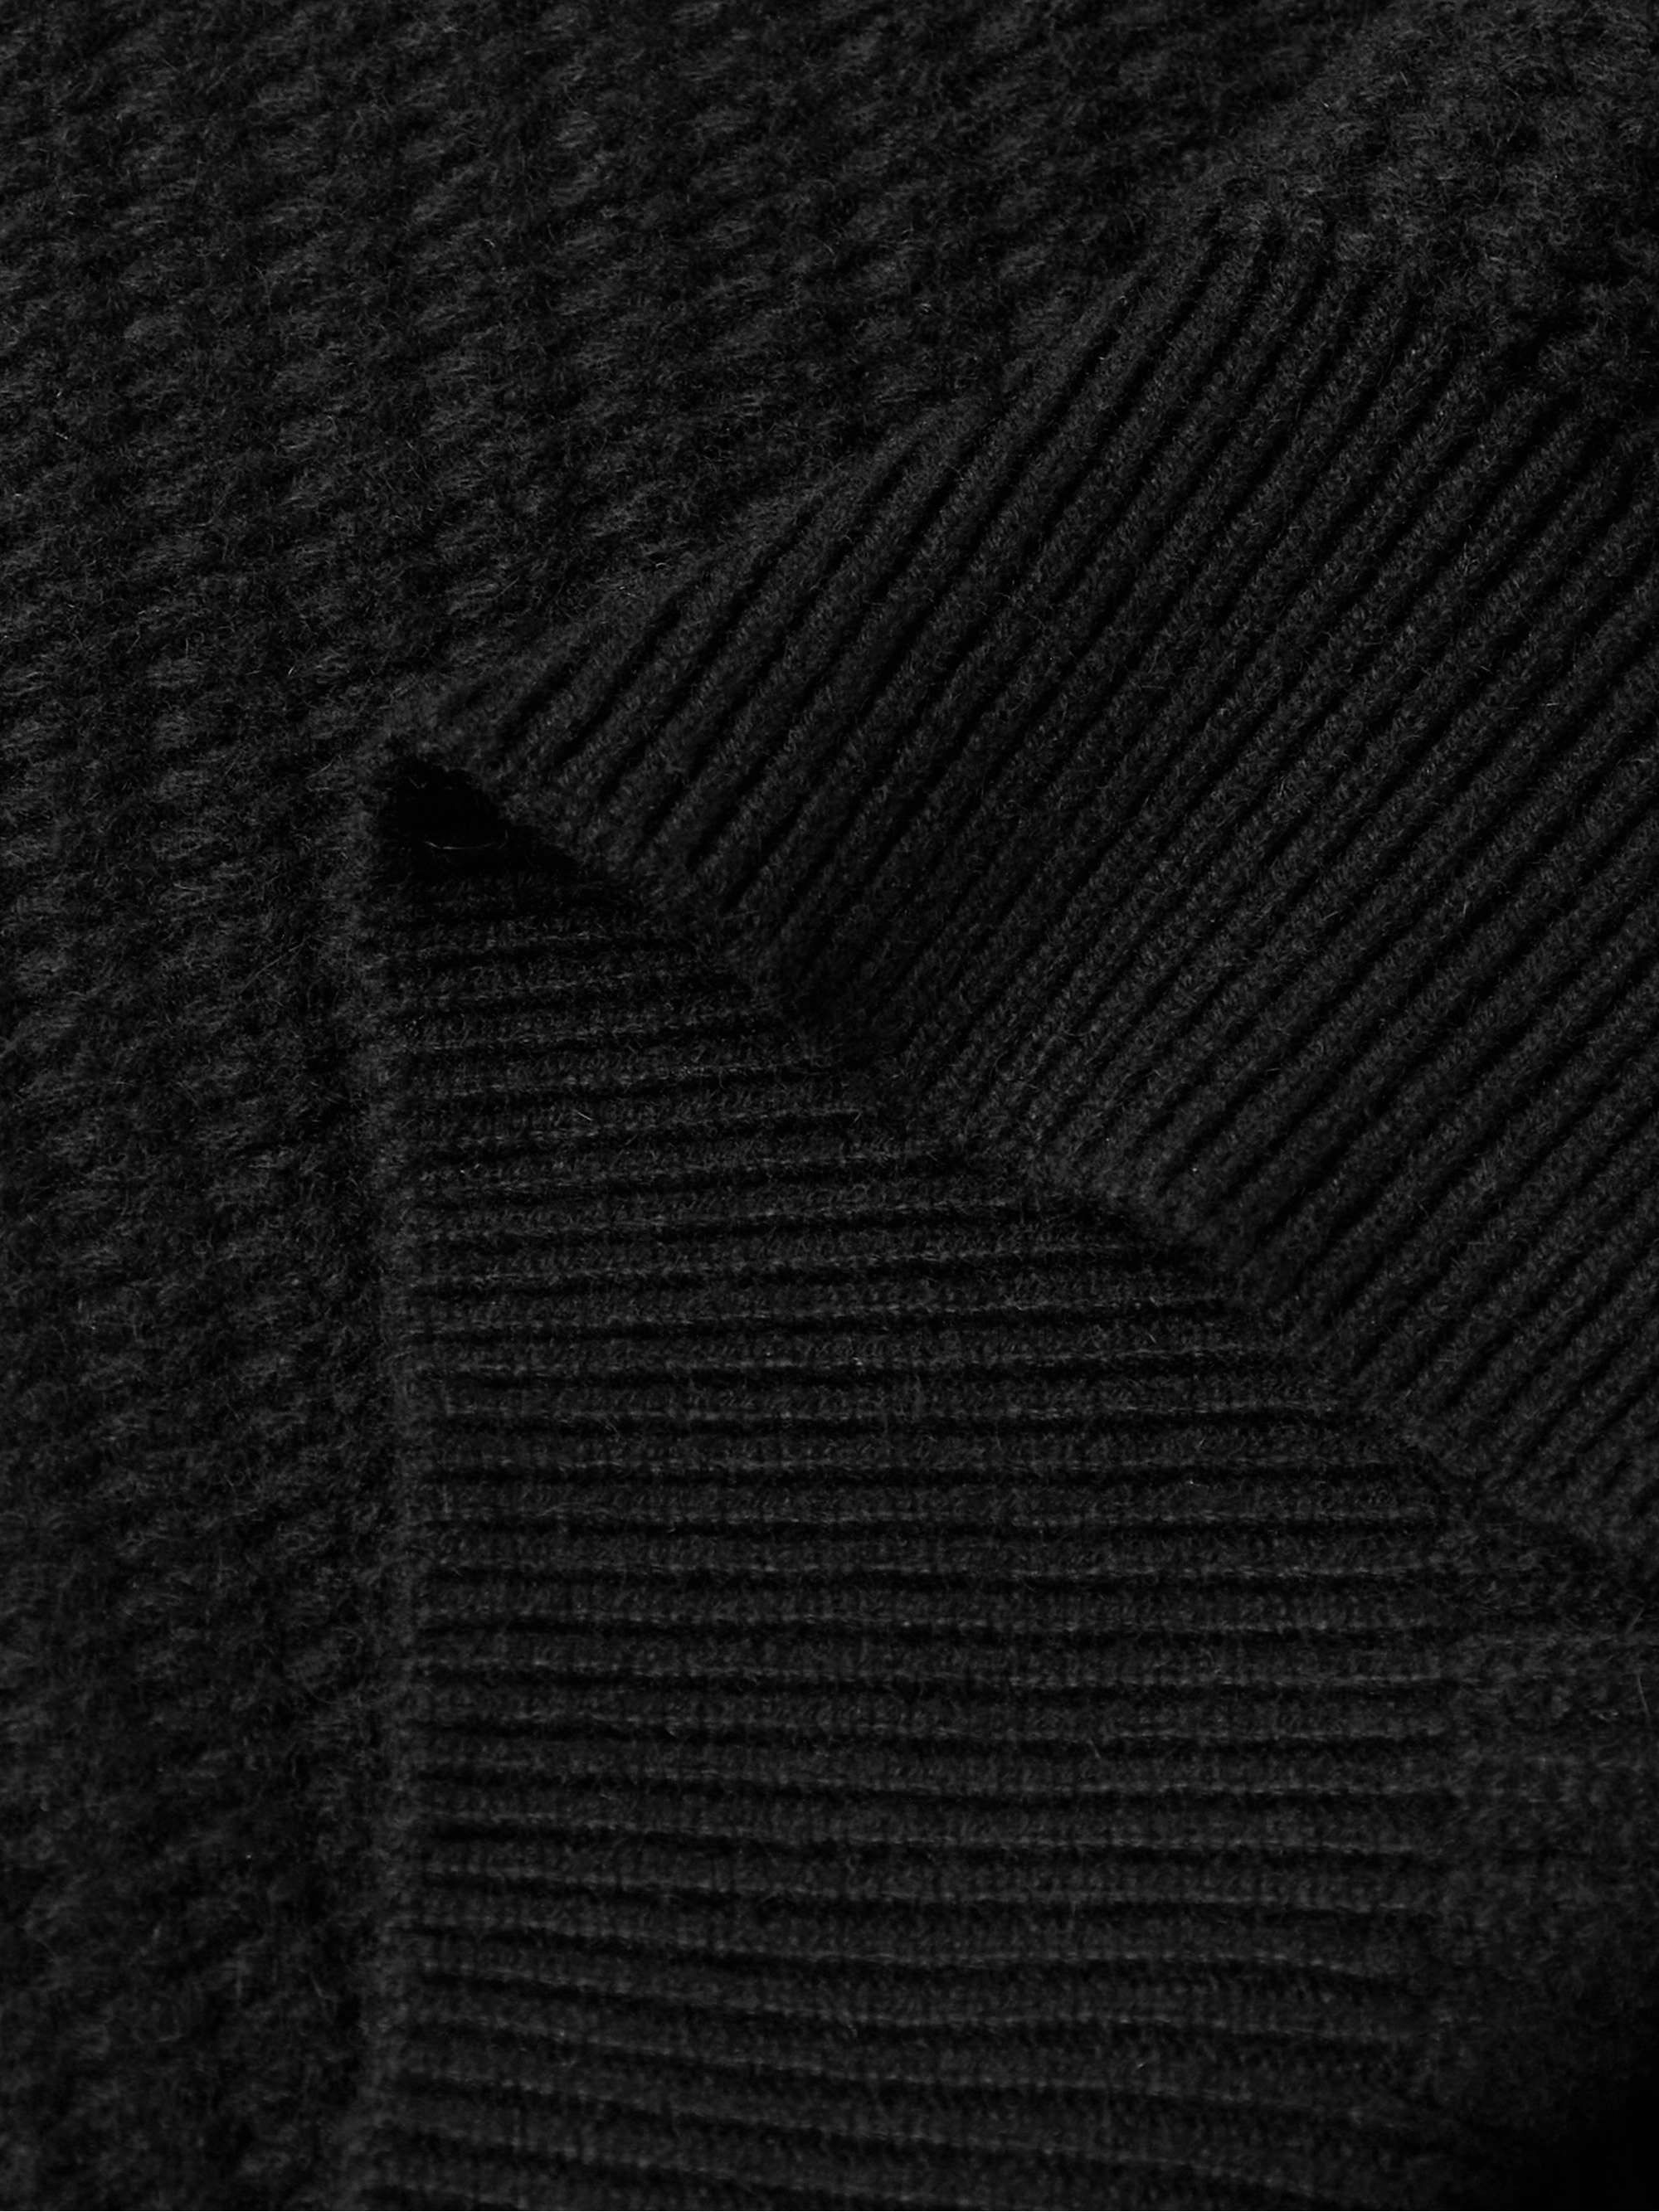 ZEGNA Ribbed Oasi Cashmere Sweater